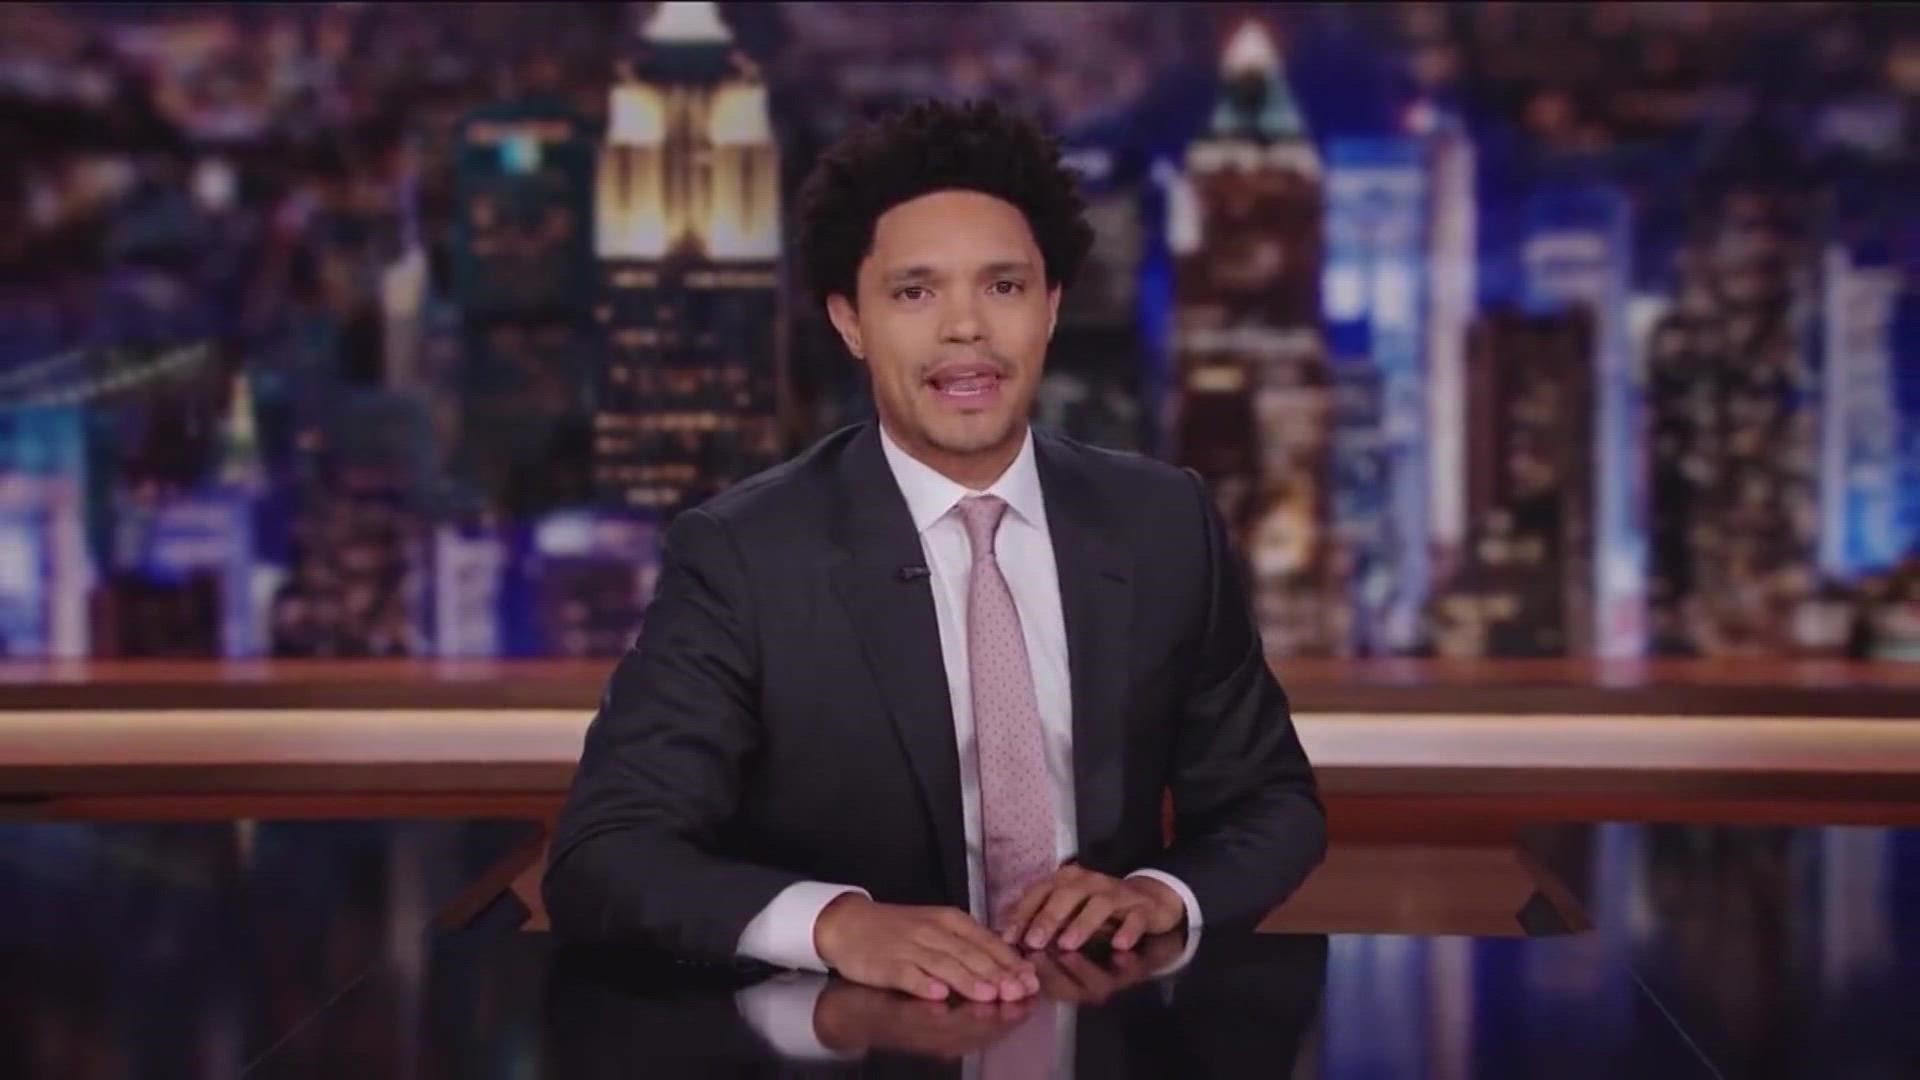 Trevor Noah took over the Daily Show from John Steward in 2015.